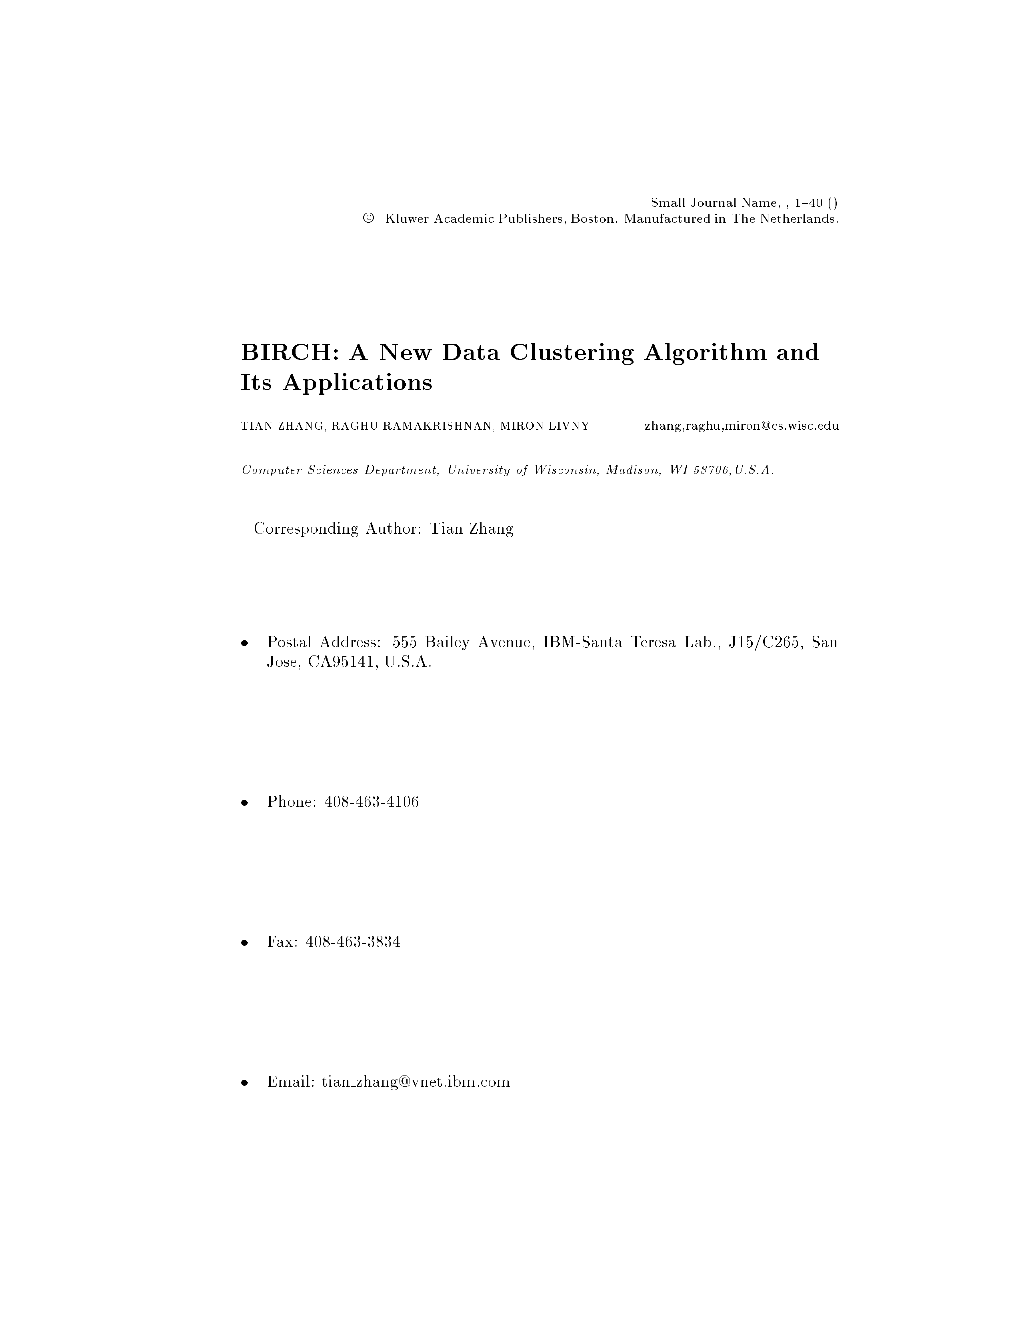 BIRCH: a New Data Clustering Algorithm and Its Applications